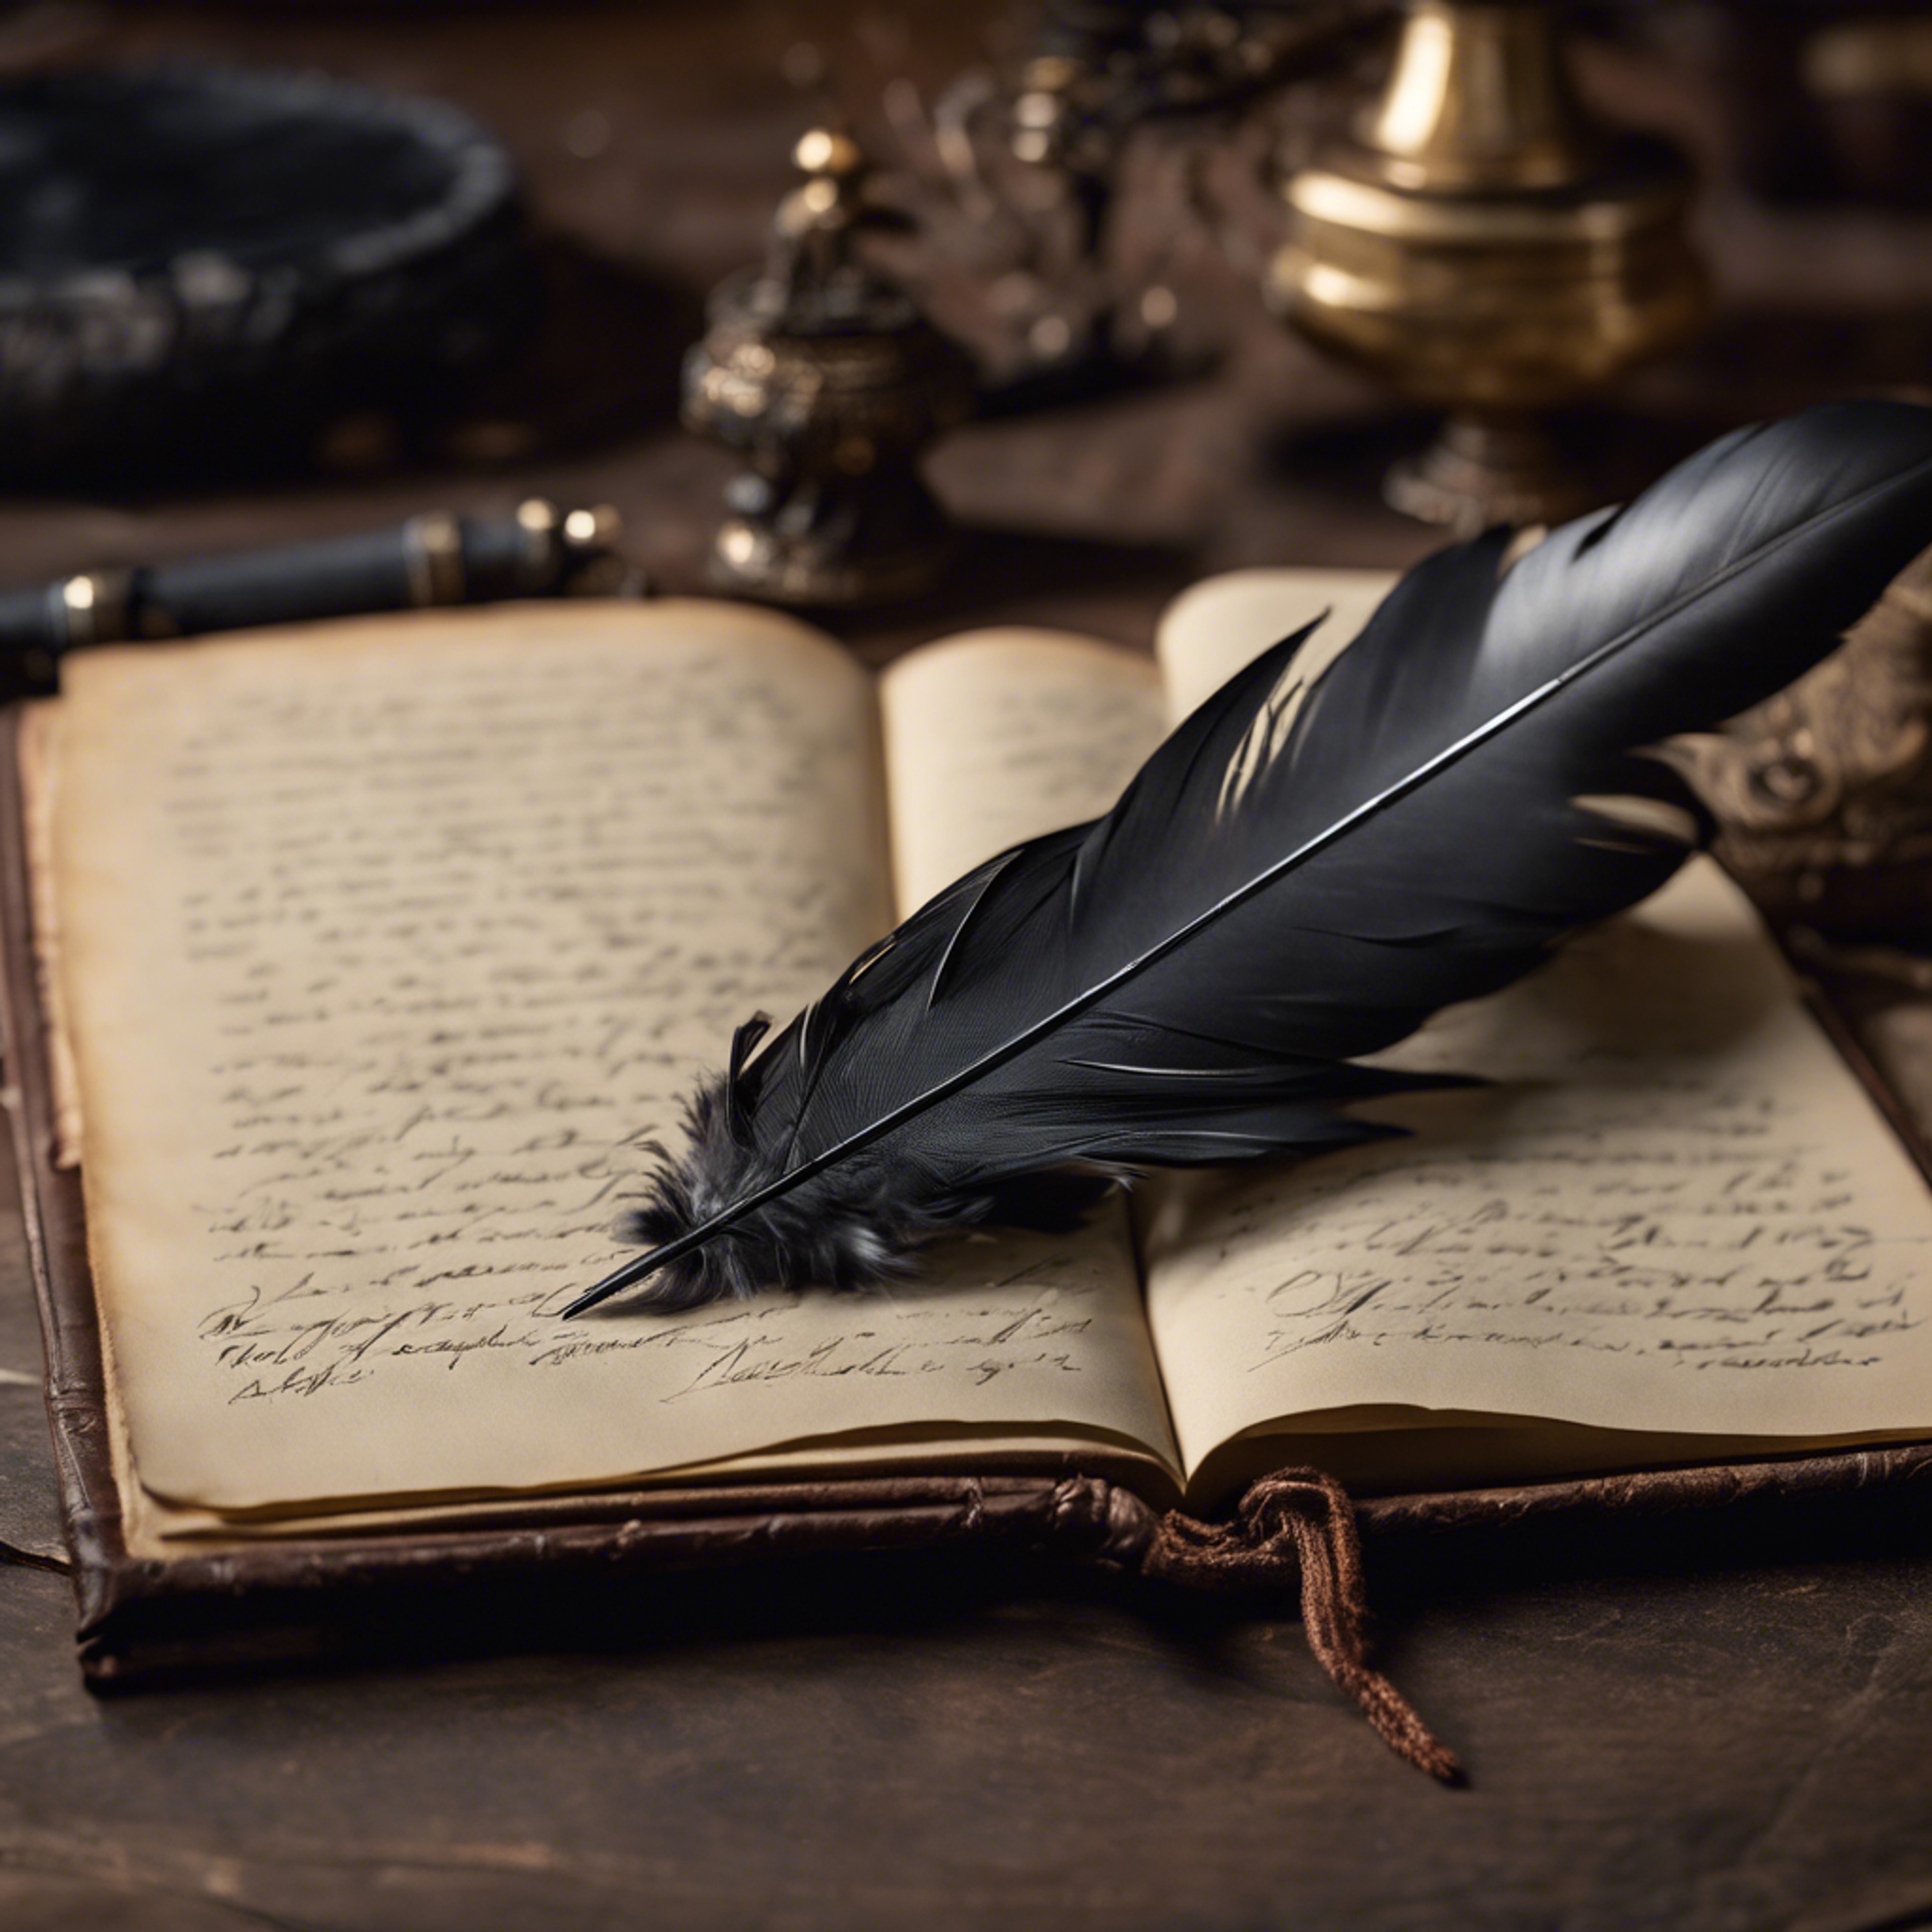 A black feather quill pen poised to write in an antique leather-bound journal. Tapet[1a576fd5c1f949af9941]